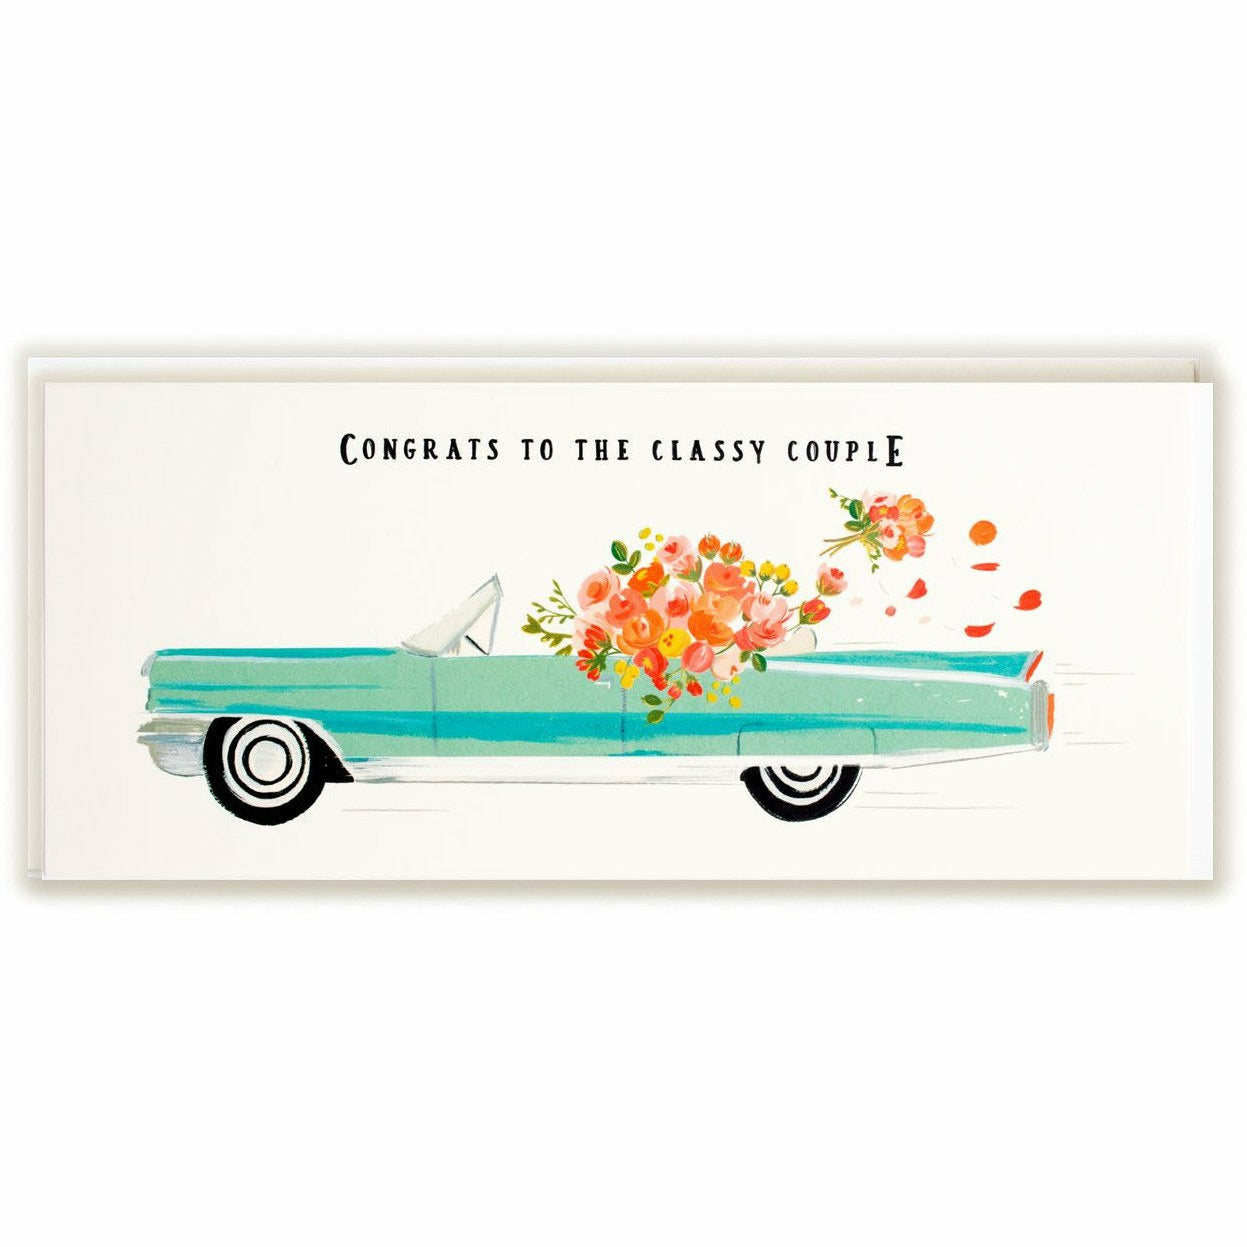 Congrats Classy Couple Card - The First Snow